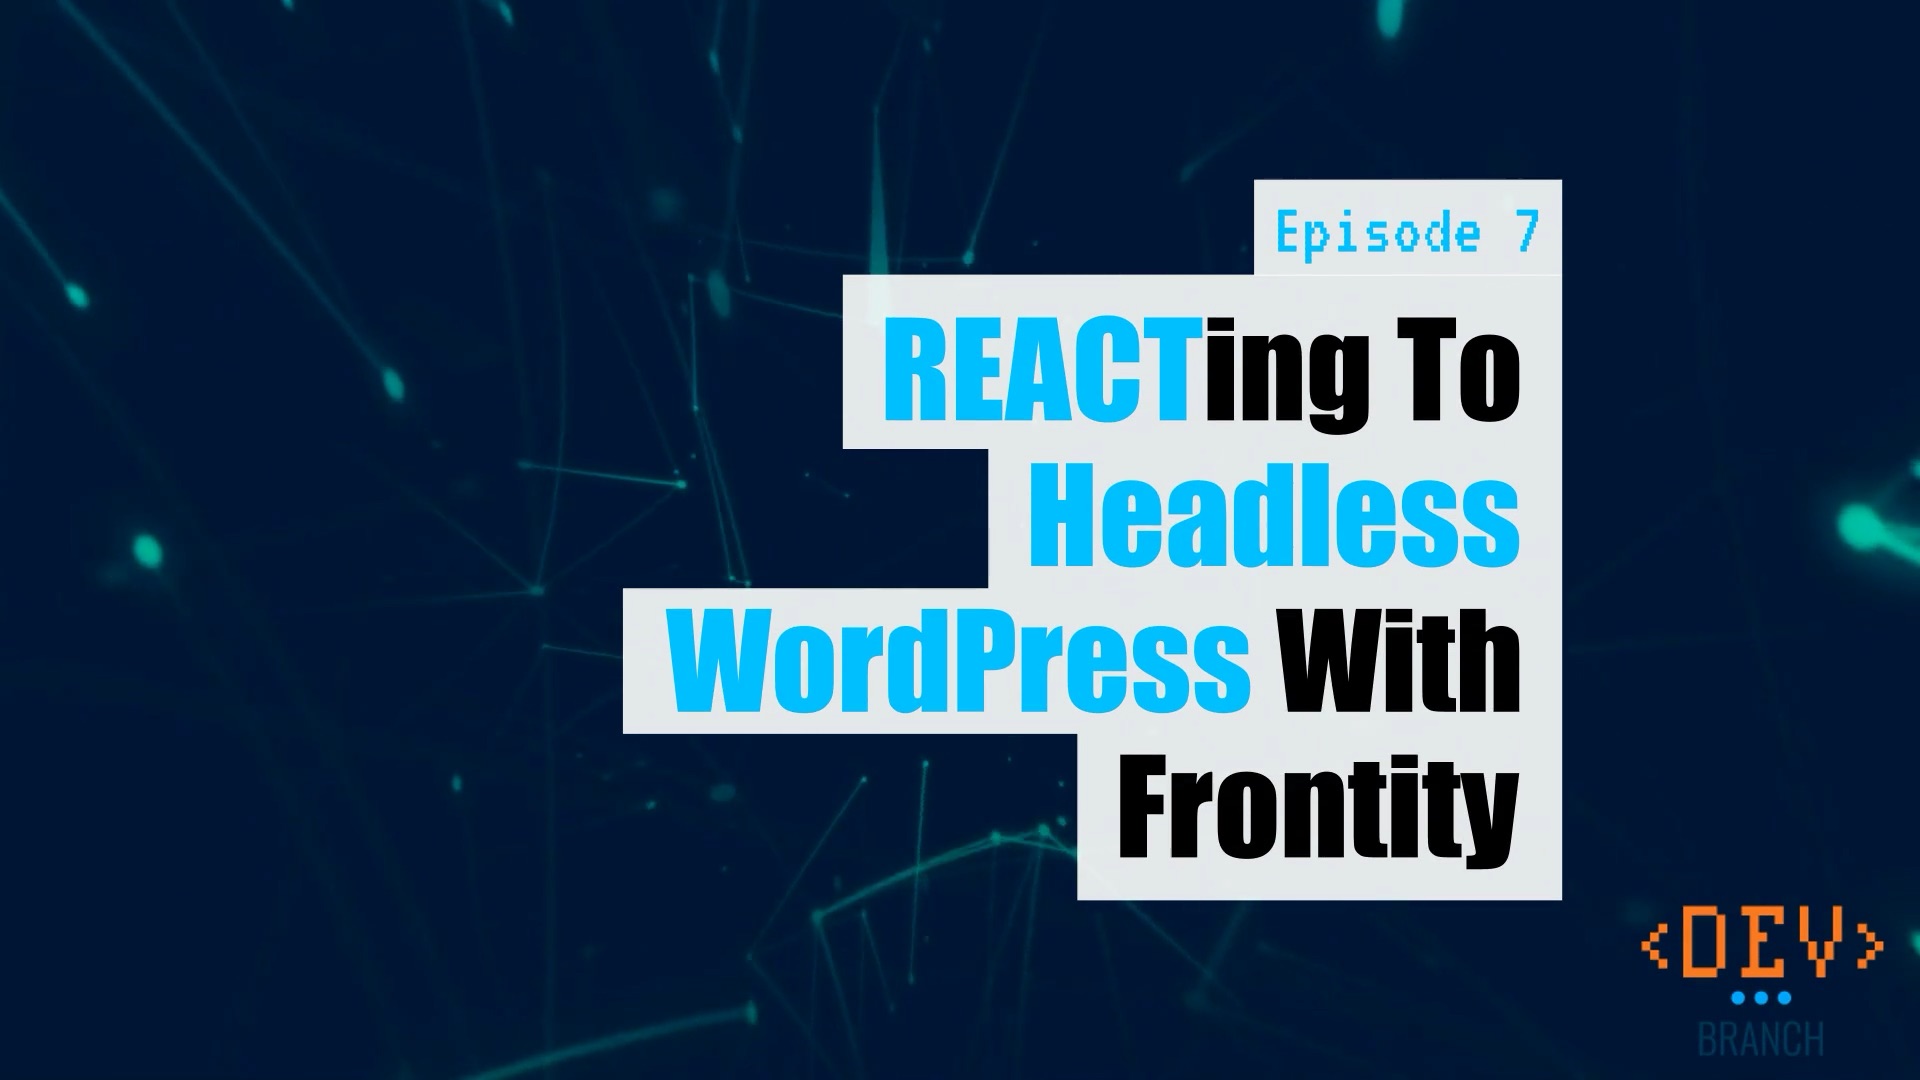 EP7 - REACTing to headless WordPress with Frontity